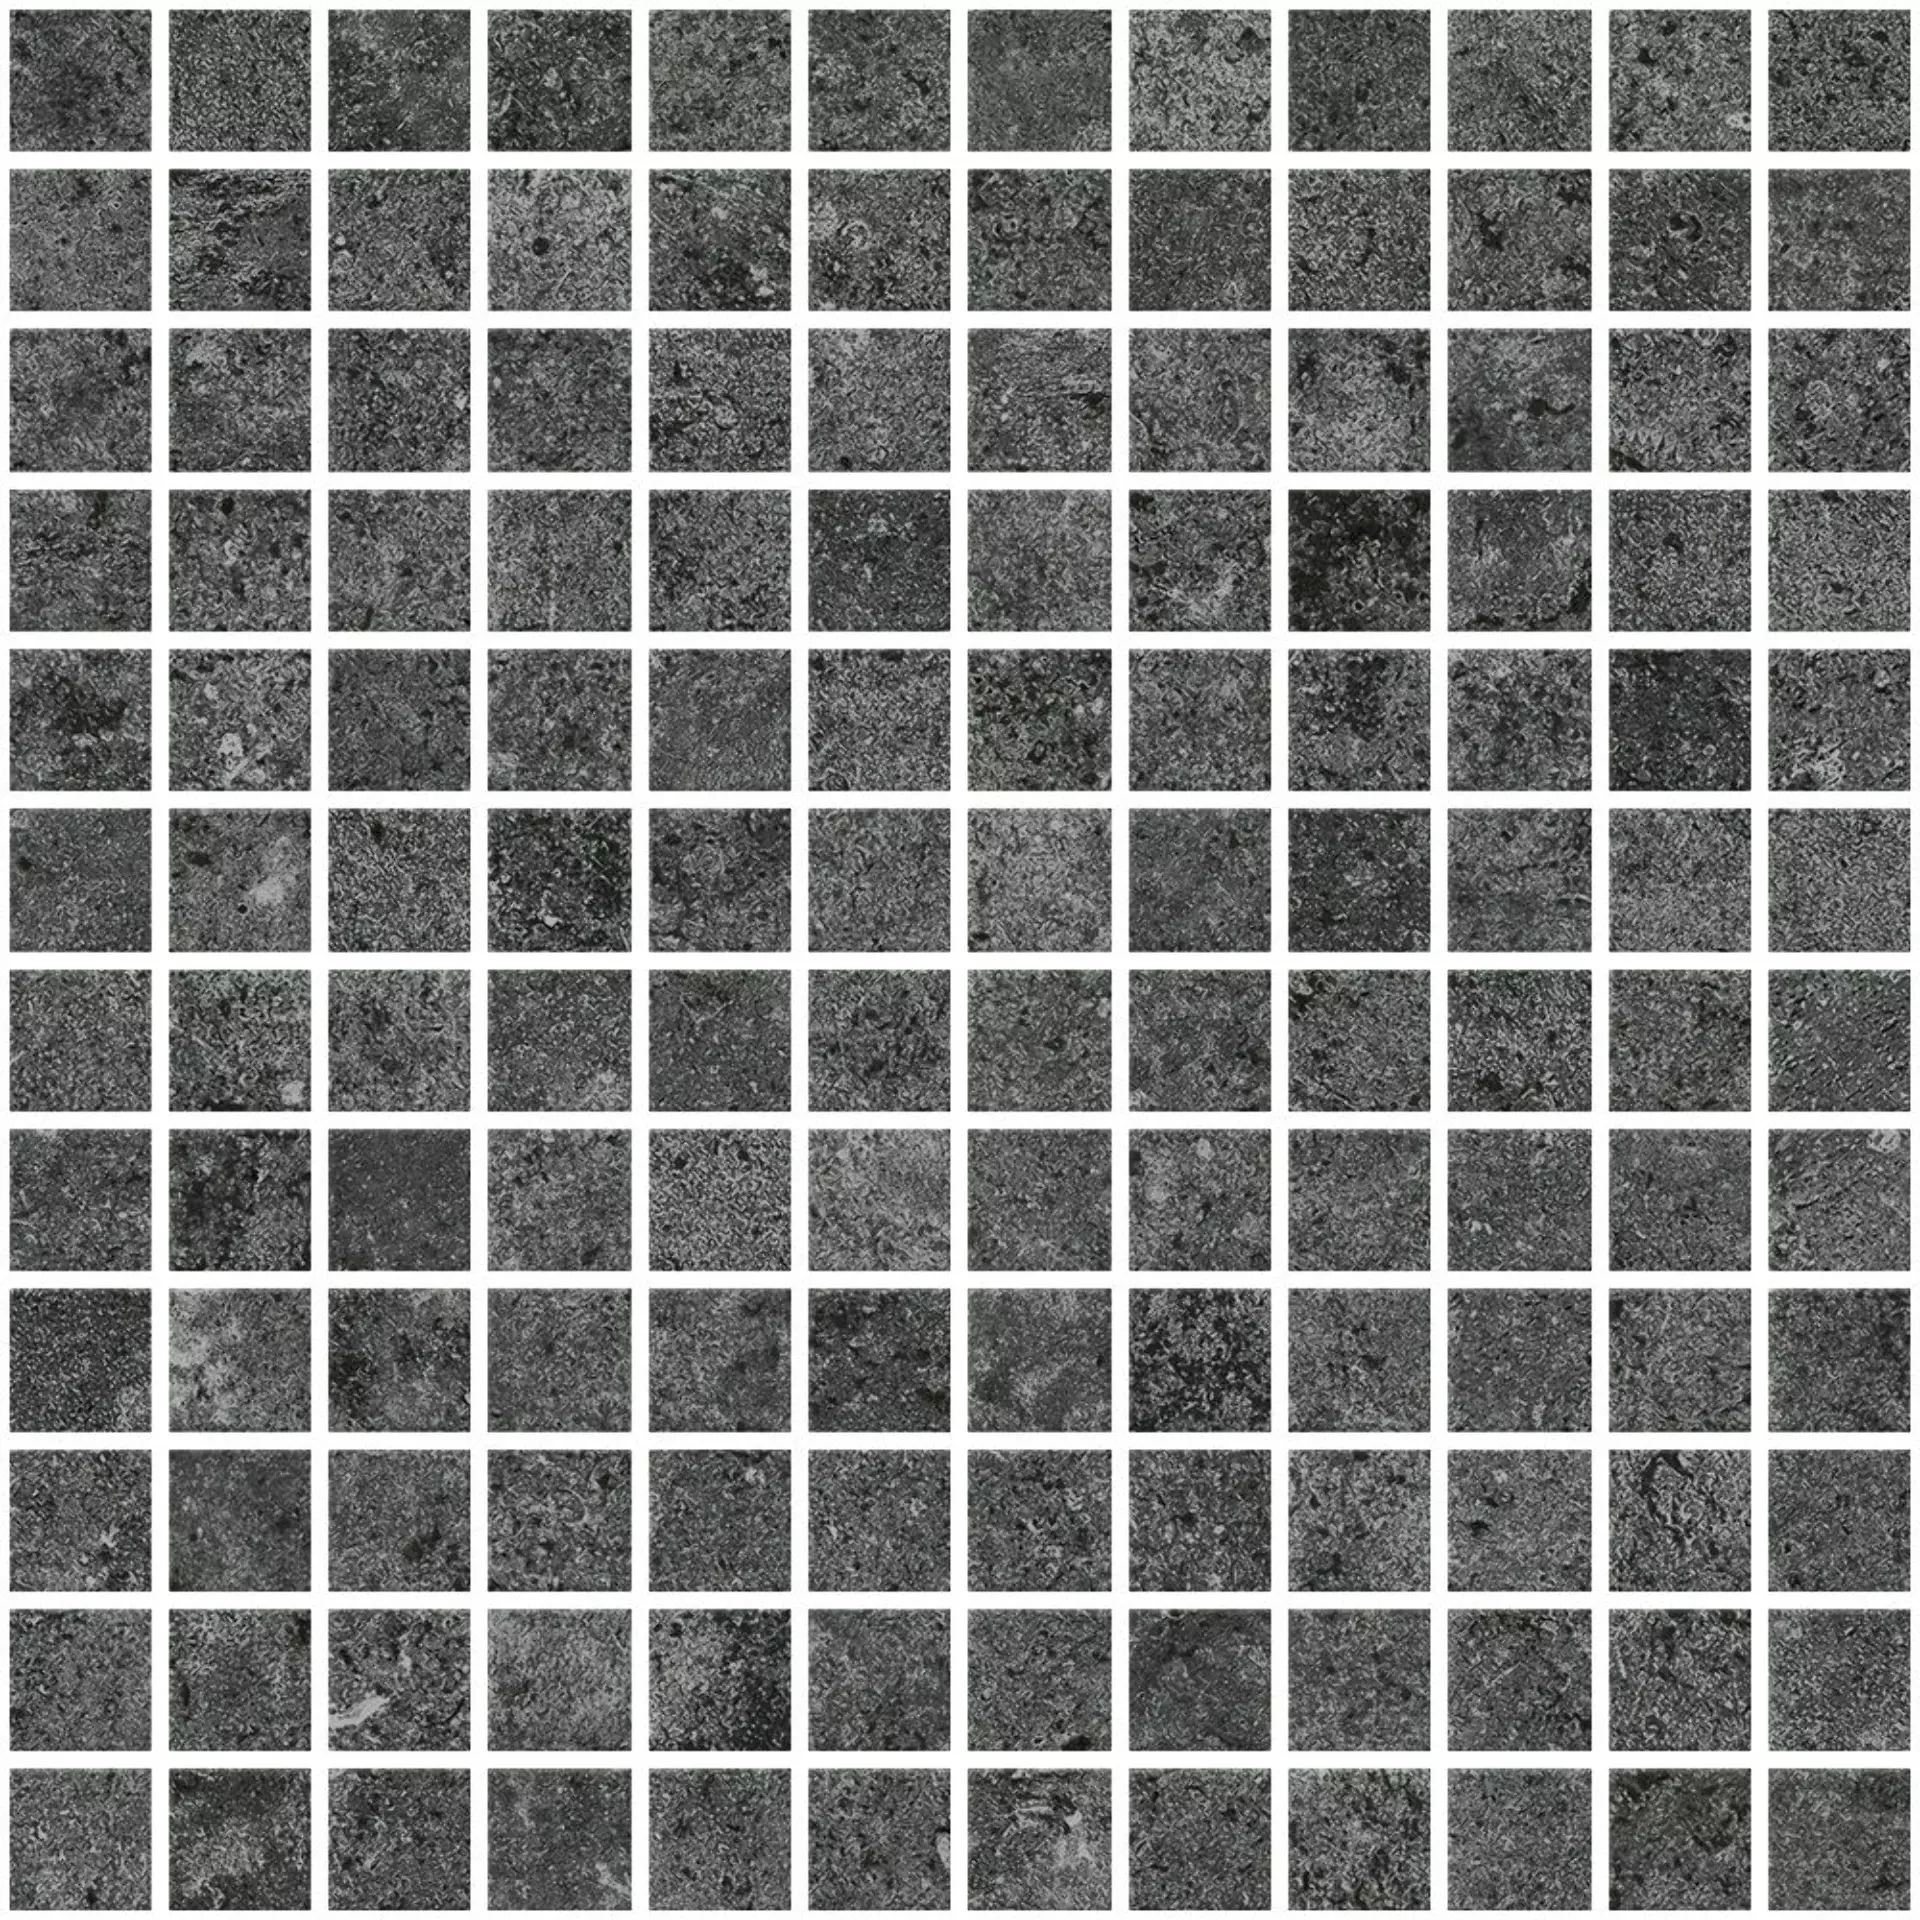 Century Glam Antracite Naturale Mosaic (2,5x2,5) 0113251 30x30cm rectified 9mm